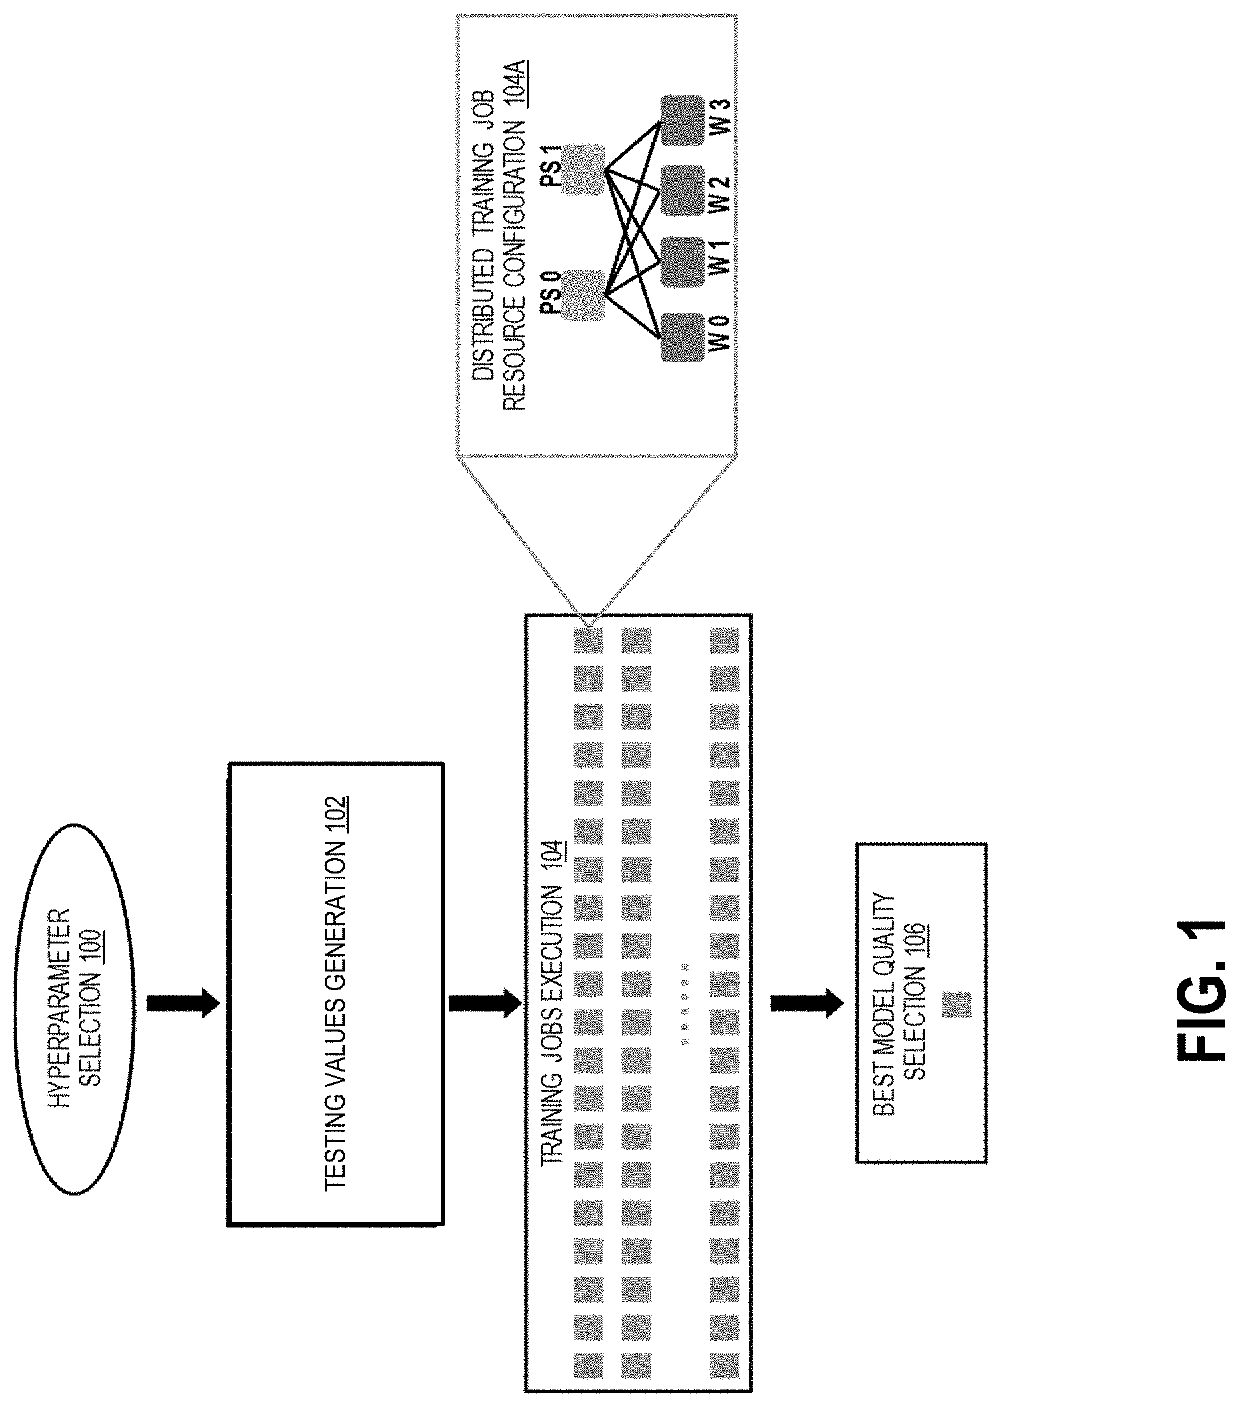 Systems and methods of resource configuration optimization for machine learning workloads